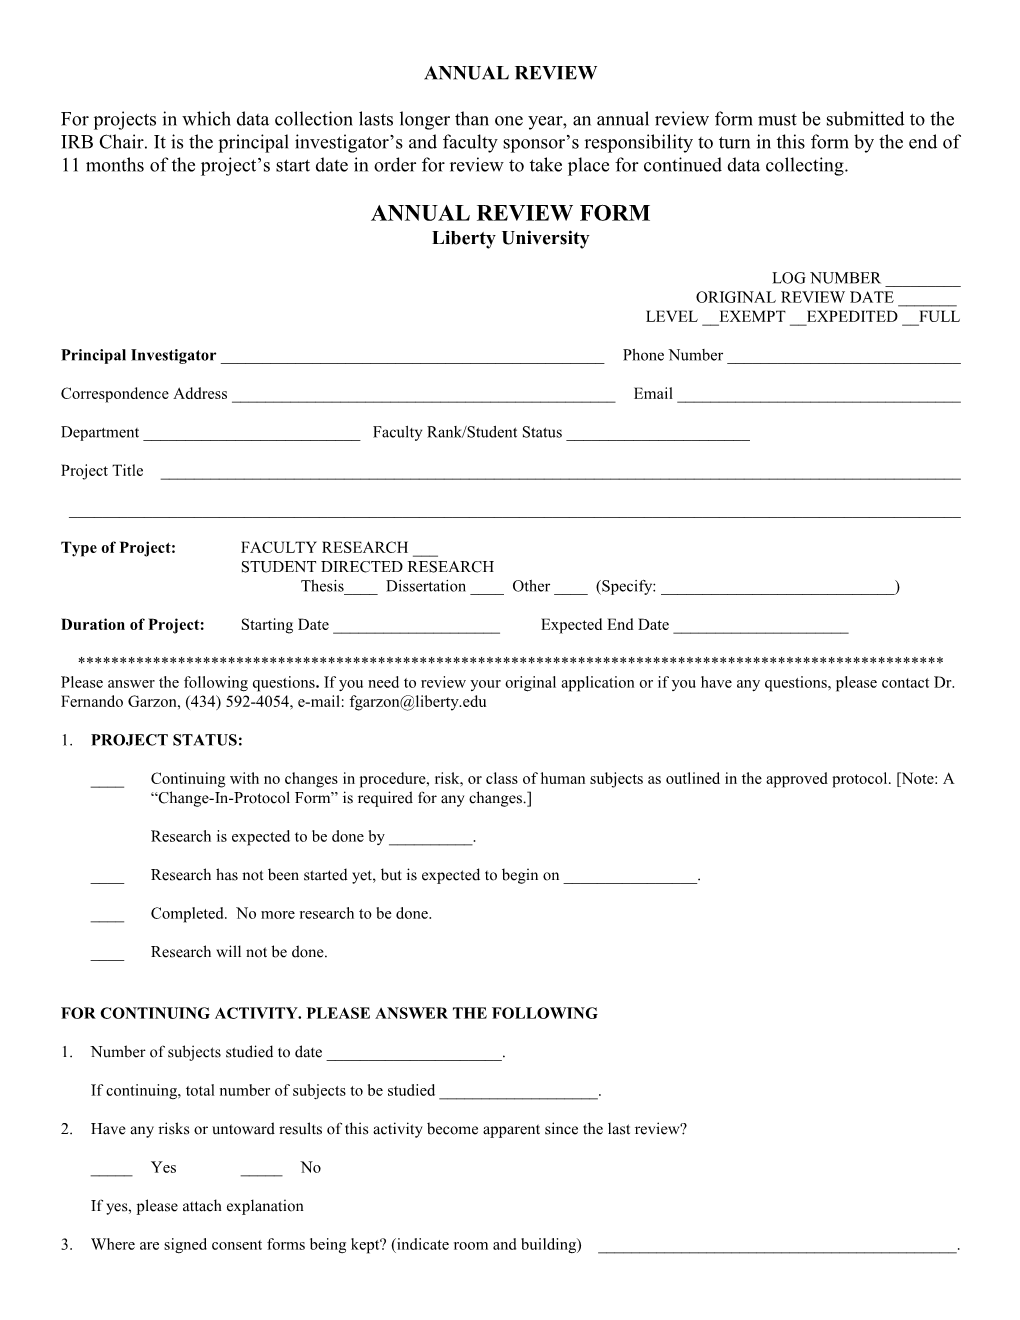 Annual Review and End-Of-Project Form